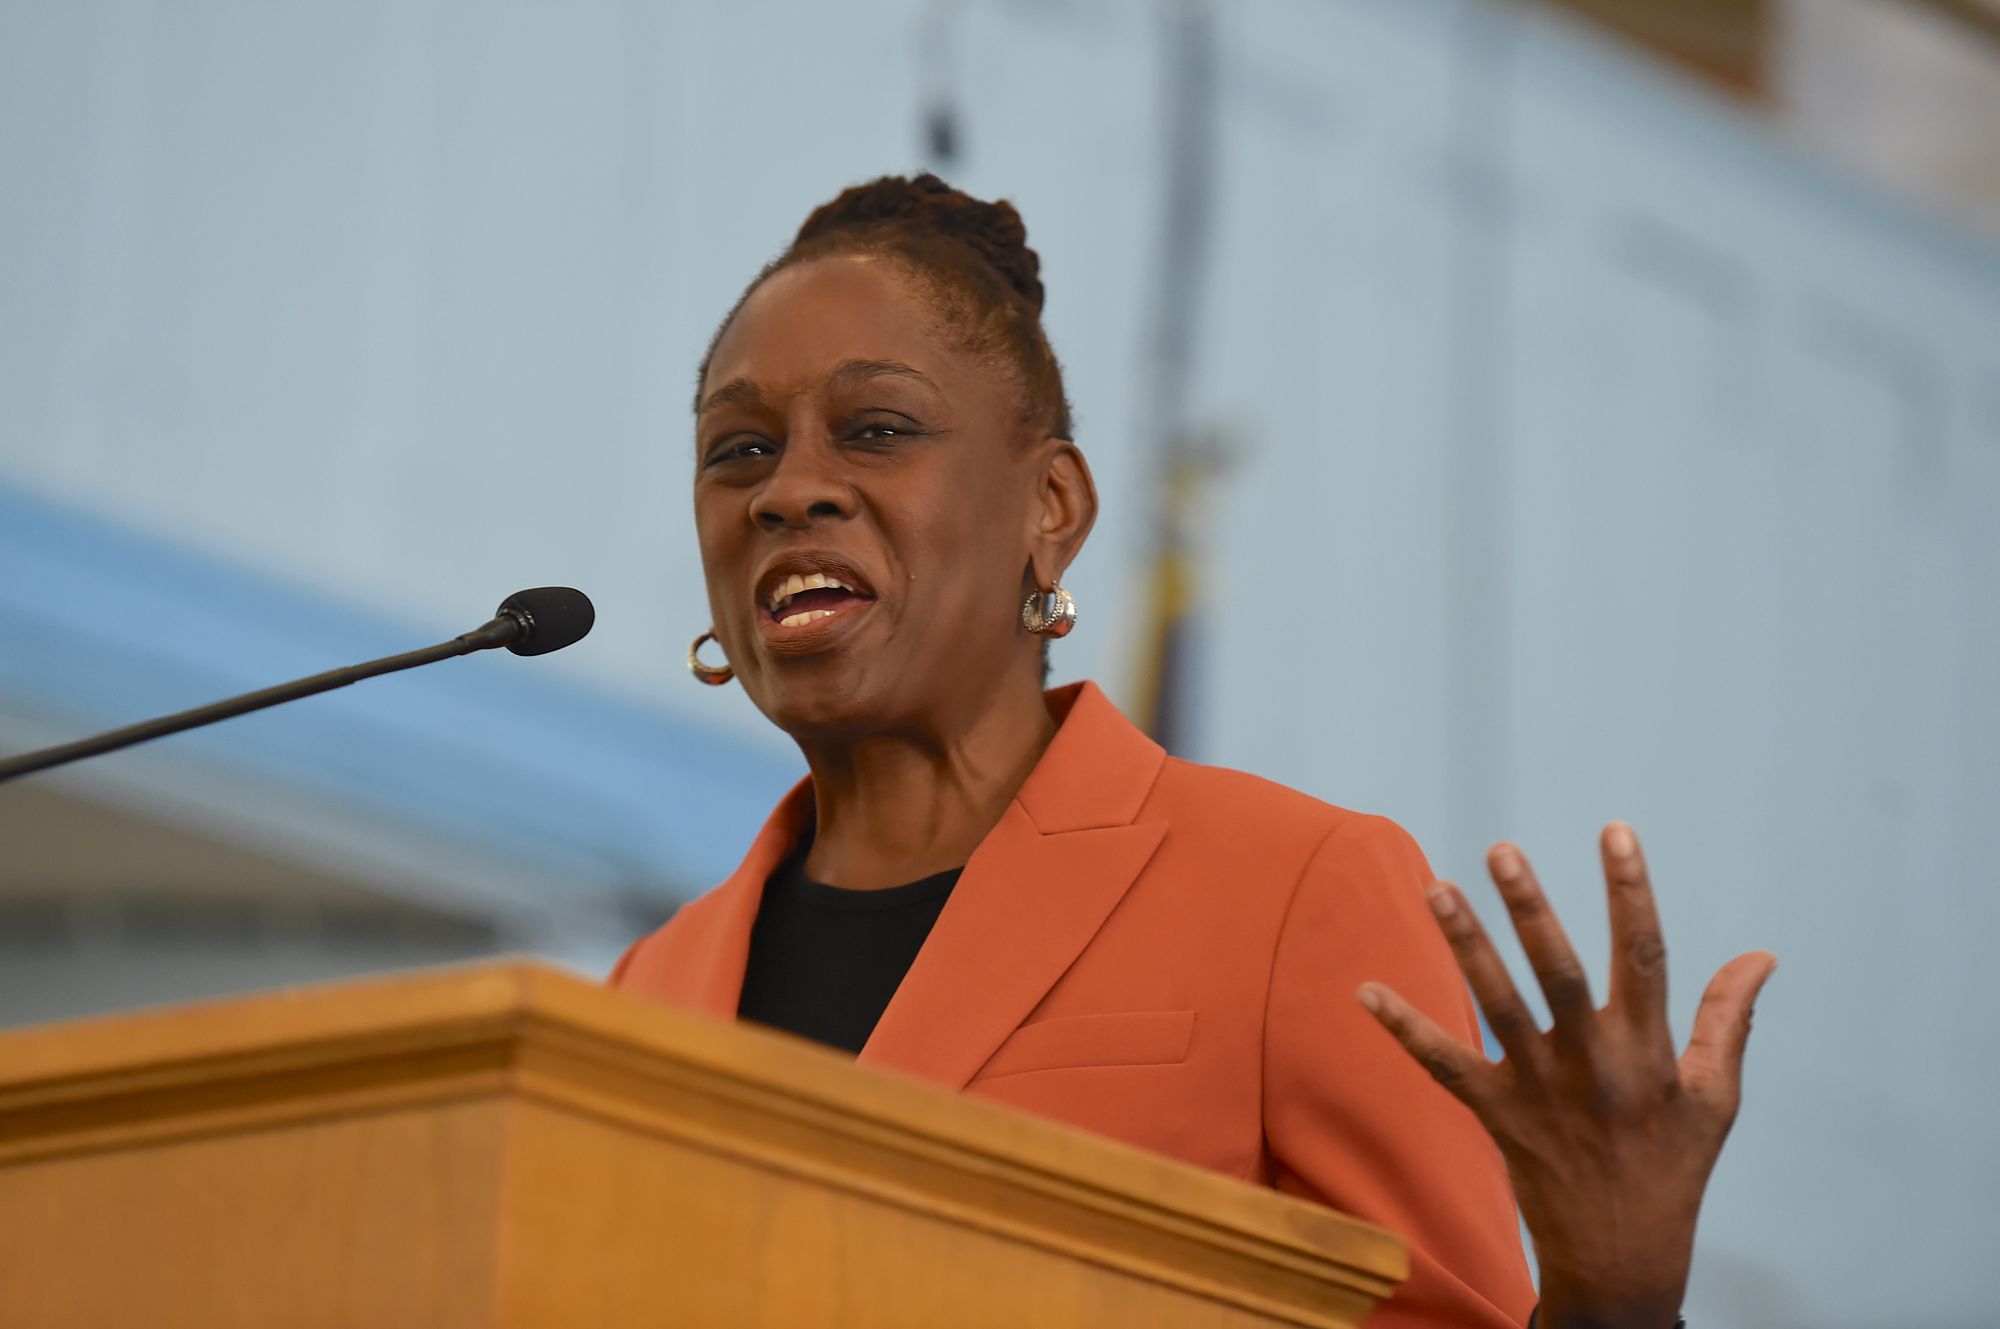 Chirlane McCray Takes Mental Health Conversation Nationwide